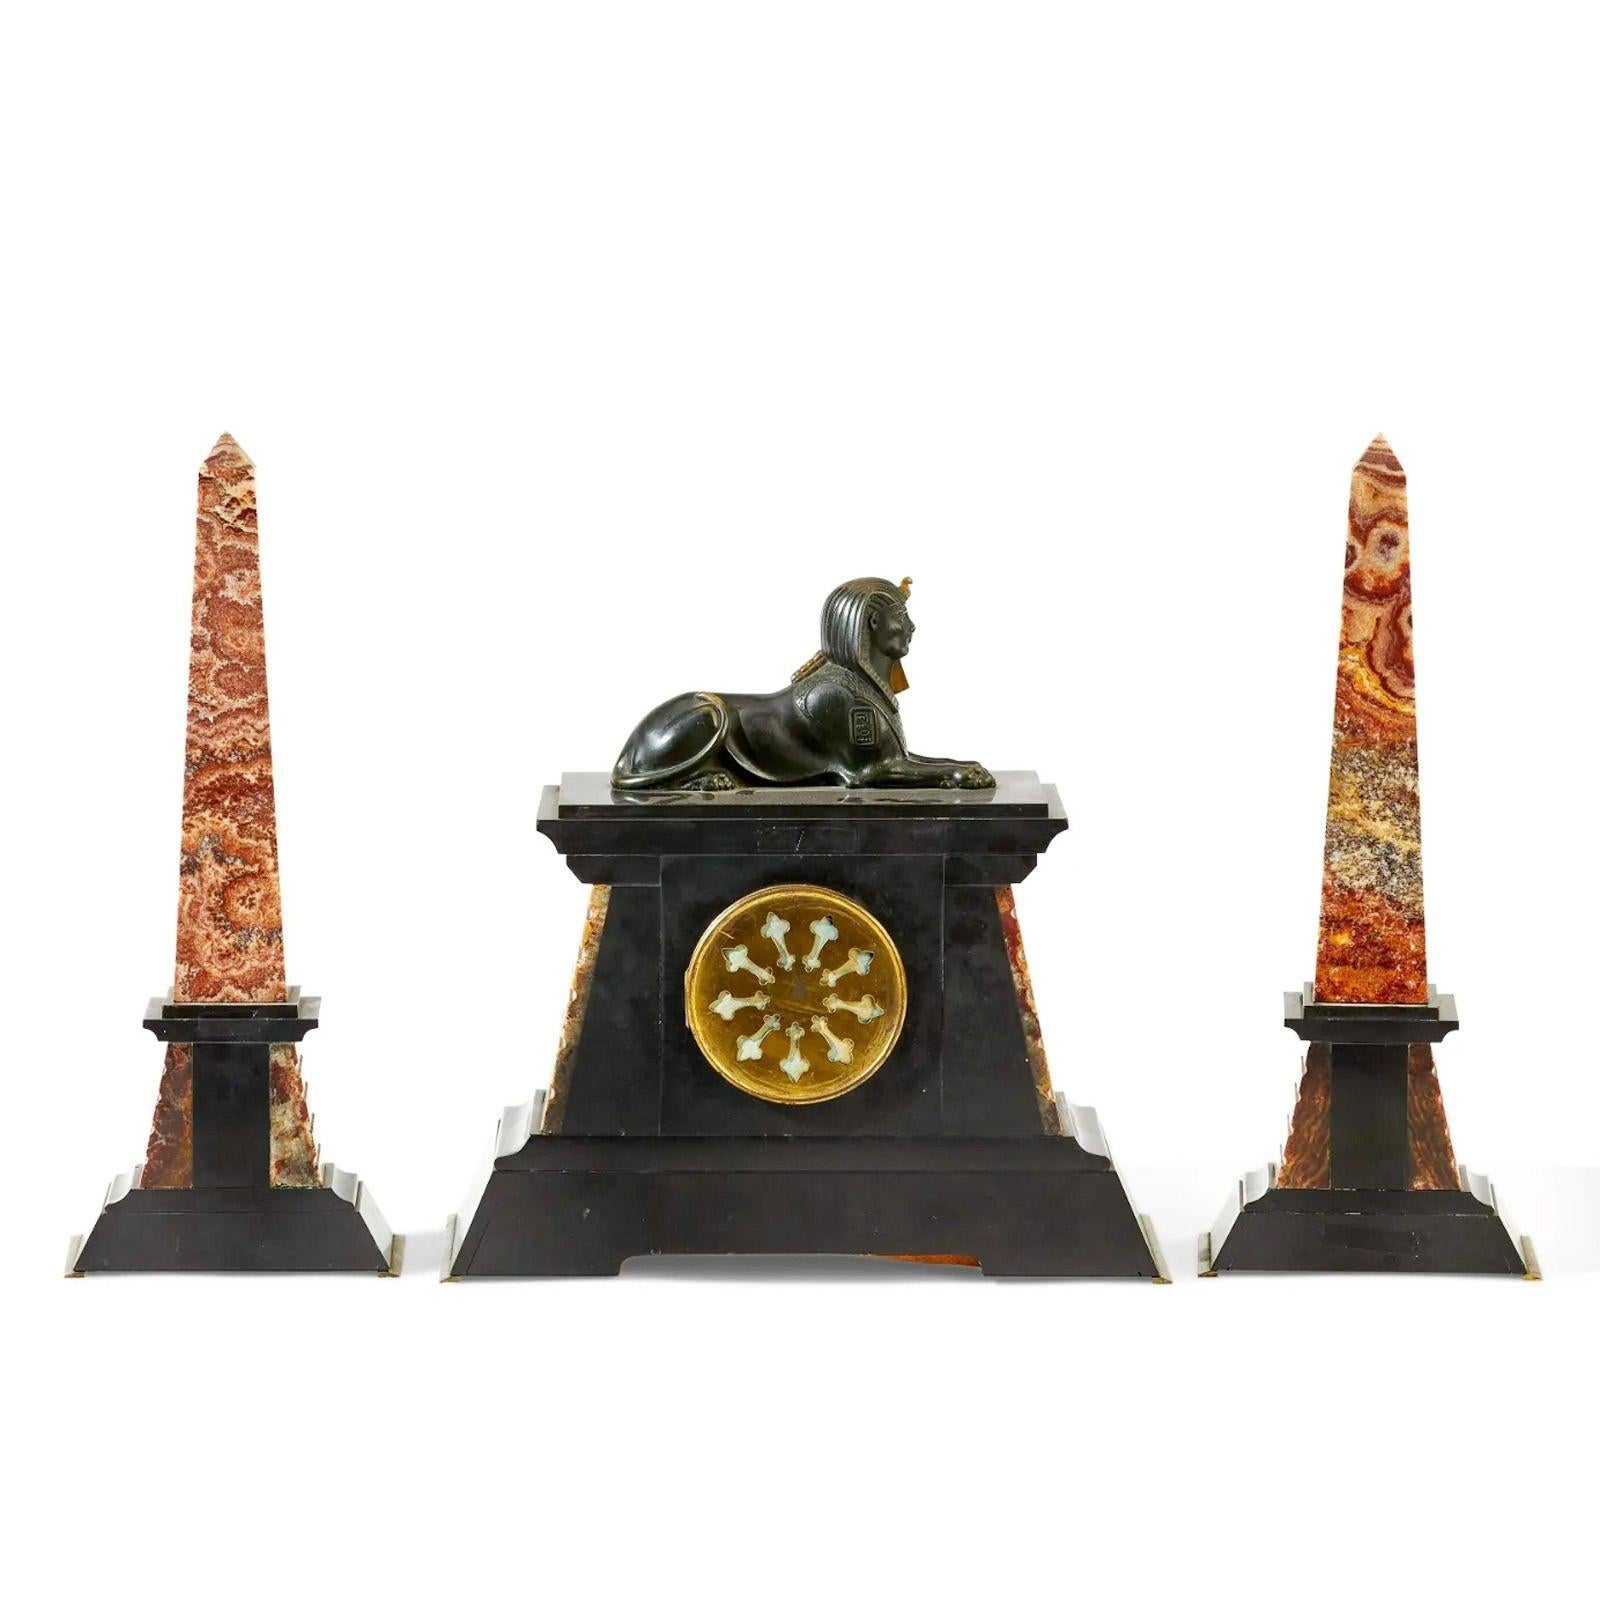 Egyptian revival mantel clock & garniture set, early 20th century.
 
Circular white sunken dial with black Arabic numerals and brass sunburst with two train movement set in a polished black slate and stepped rouge marble case decorated with